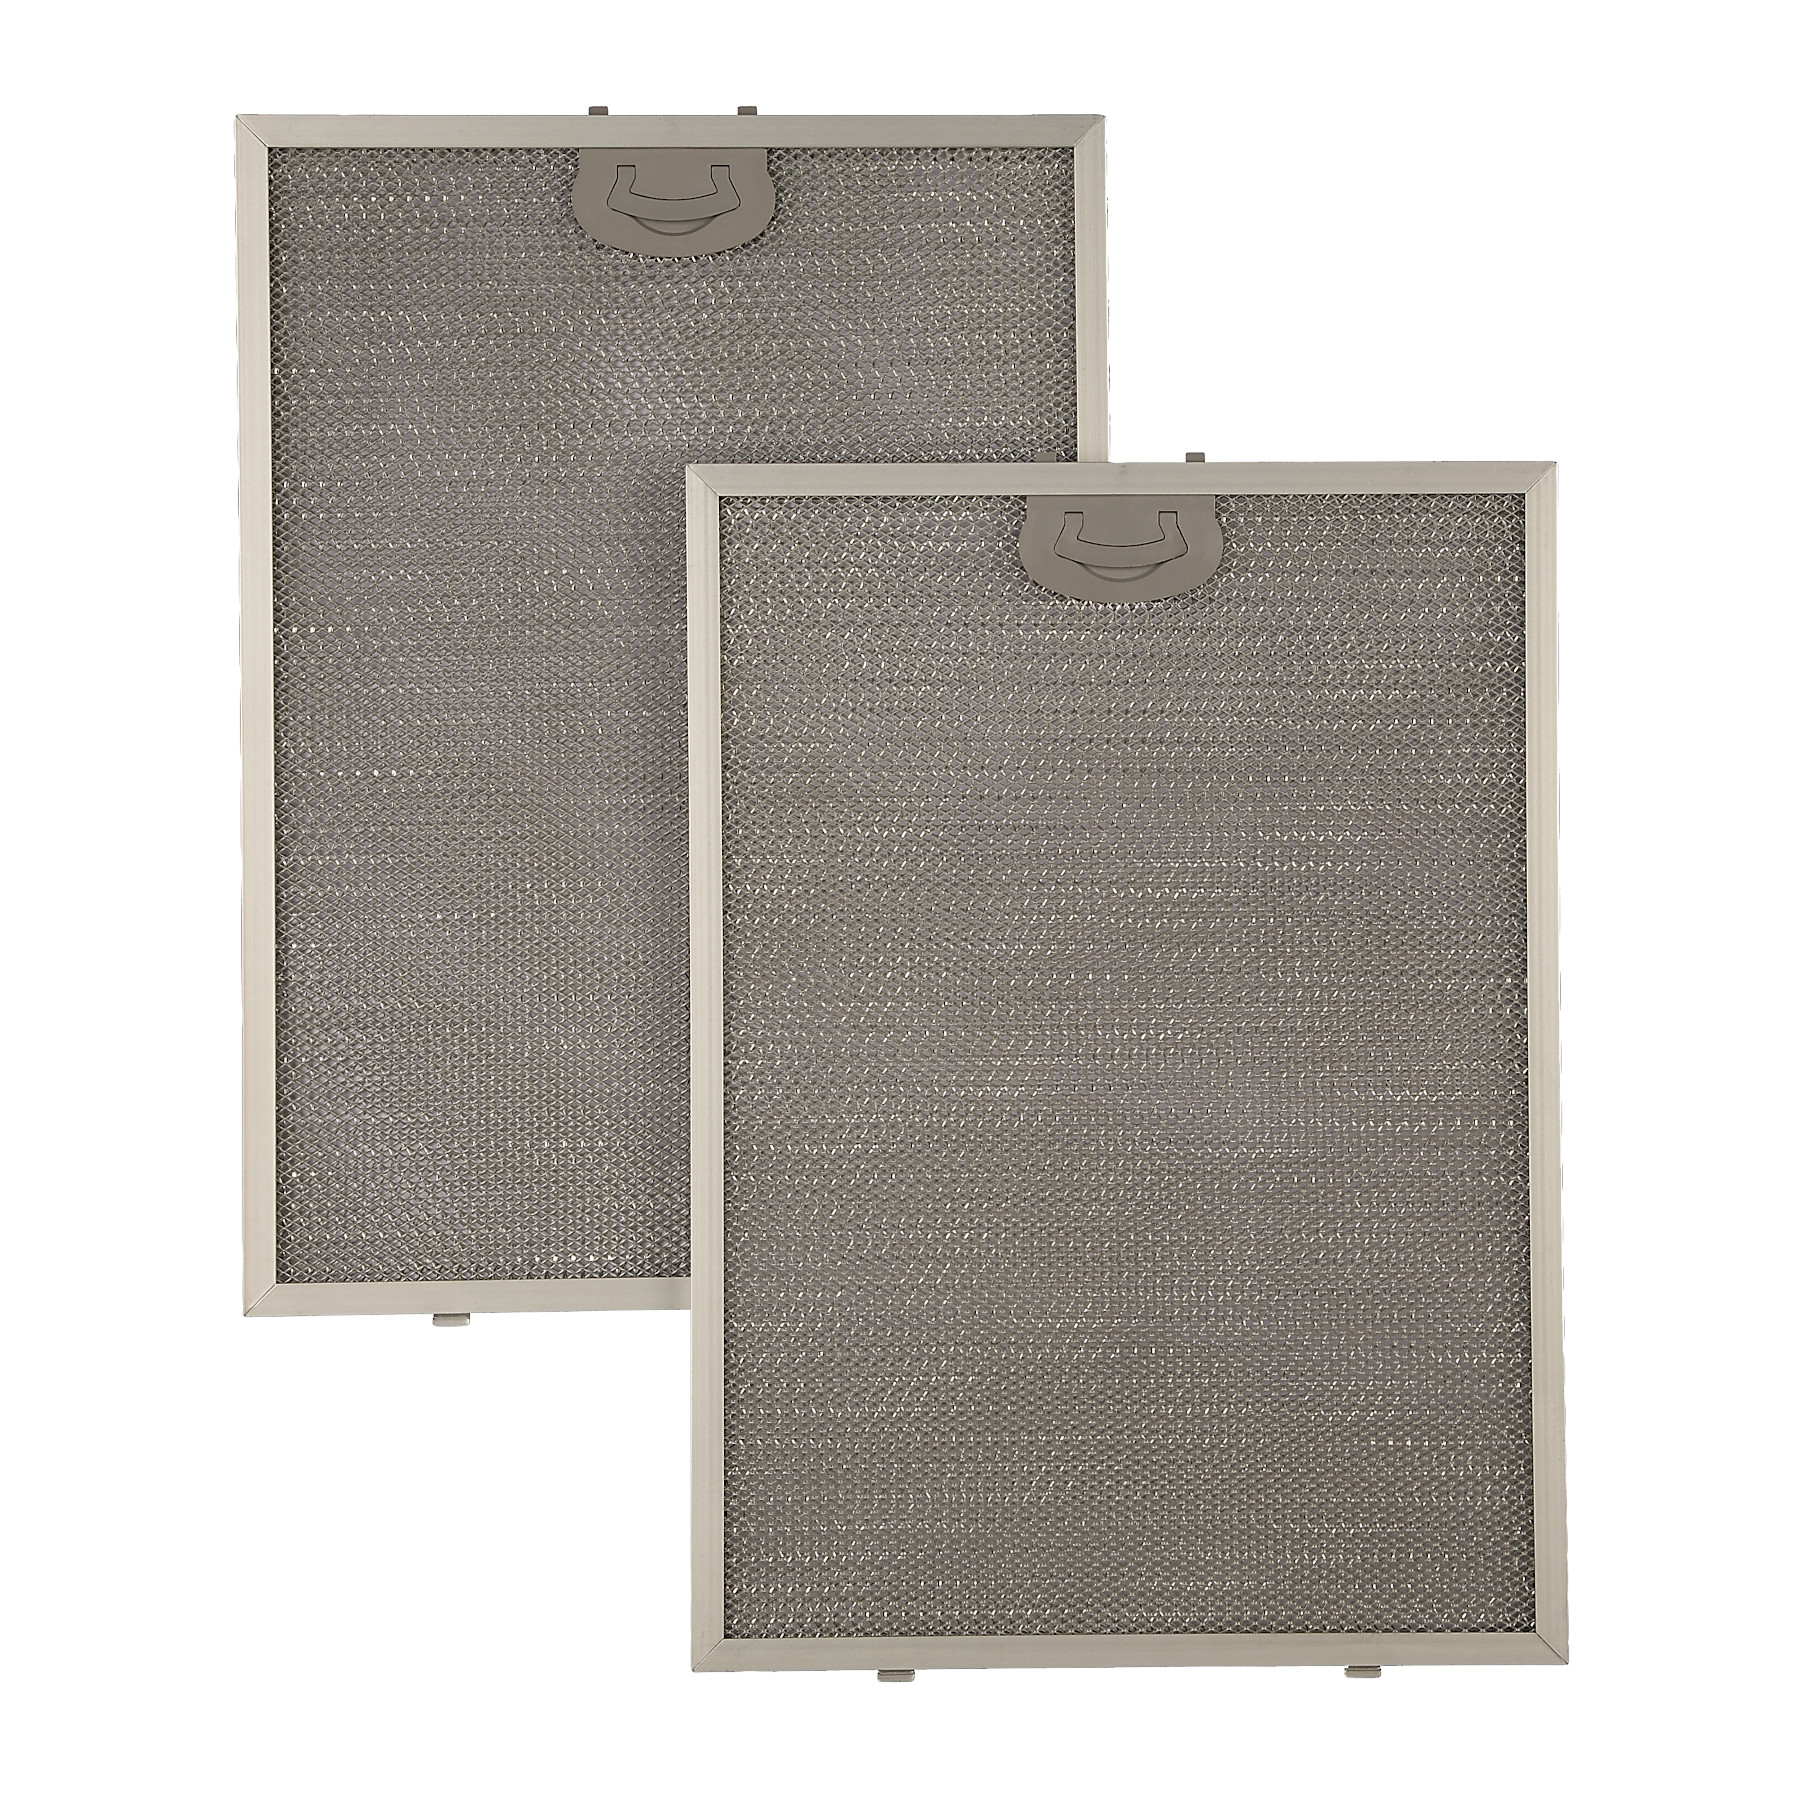 Aluminum Replacement Grease Filter with Antimicrobial Protection for 30-Inch QP1 Series